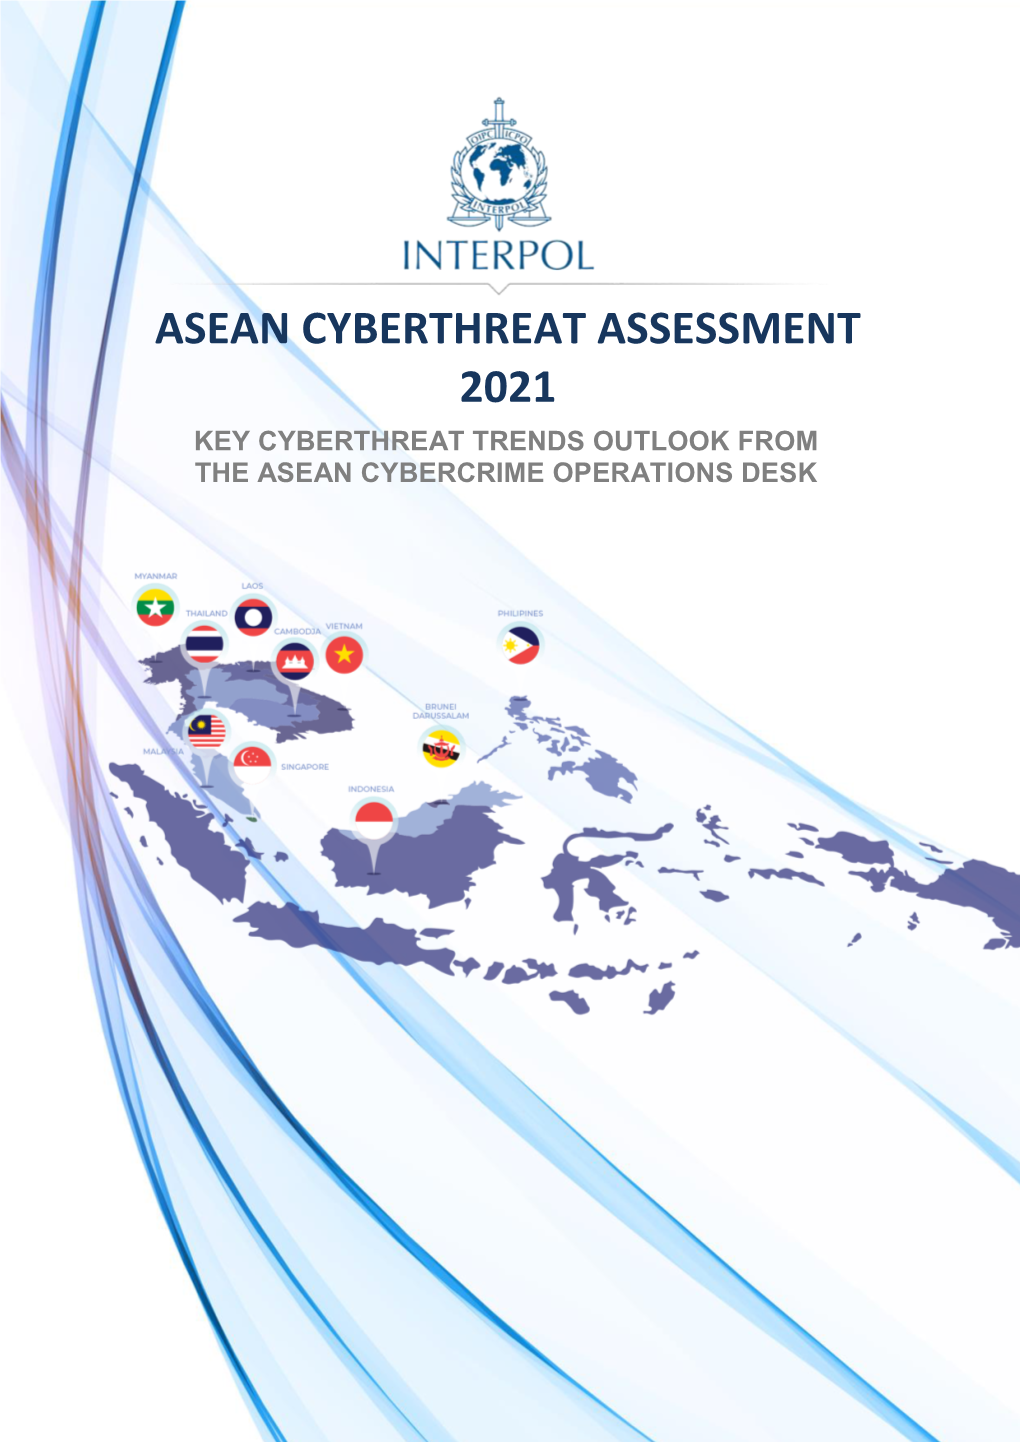 Asean Cyberthreat Assessment 2021 Key Cyberthreat Trends Outlook from the Asean Cybercrime Operations Desk